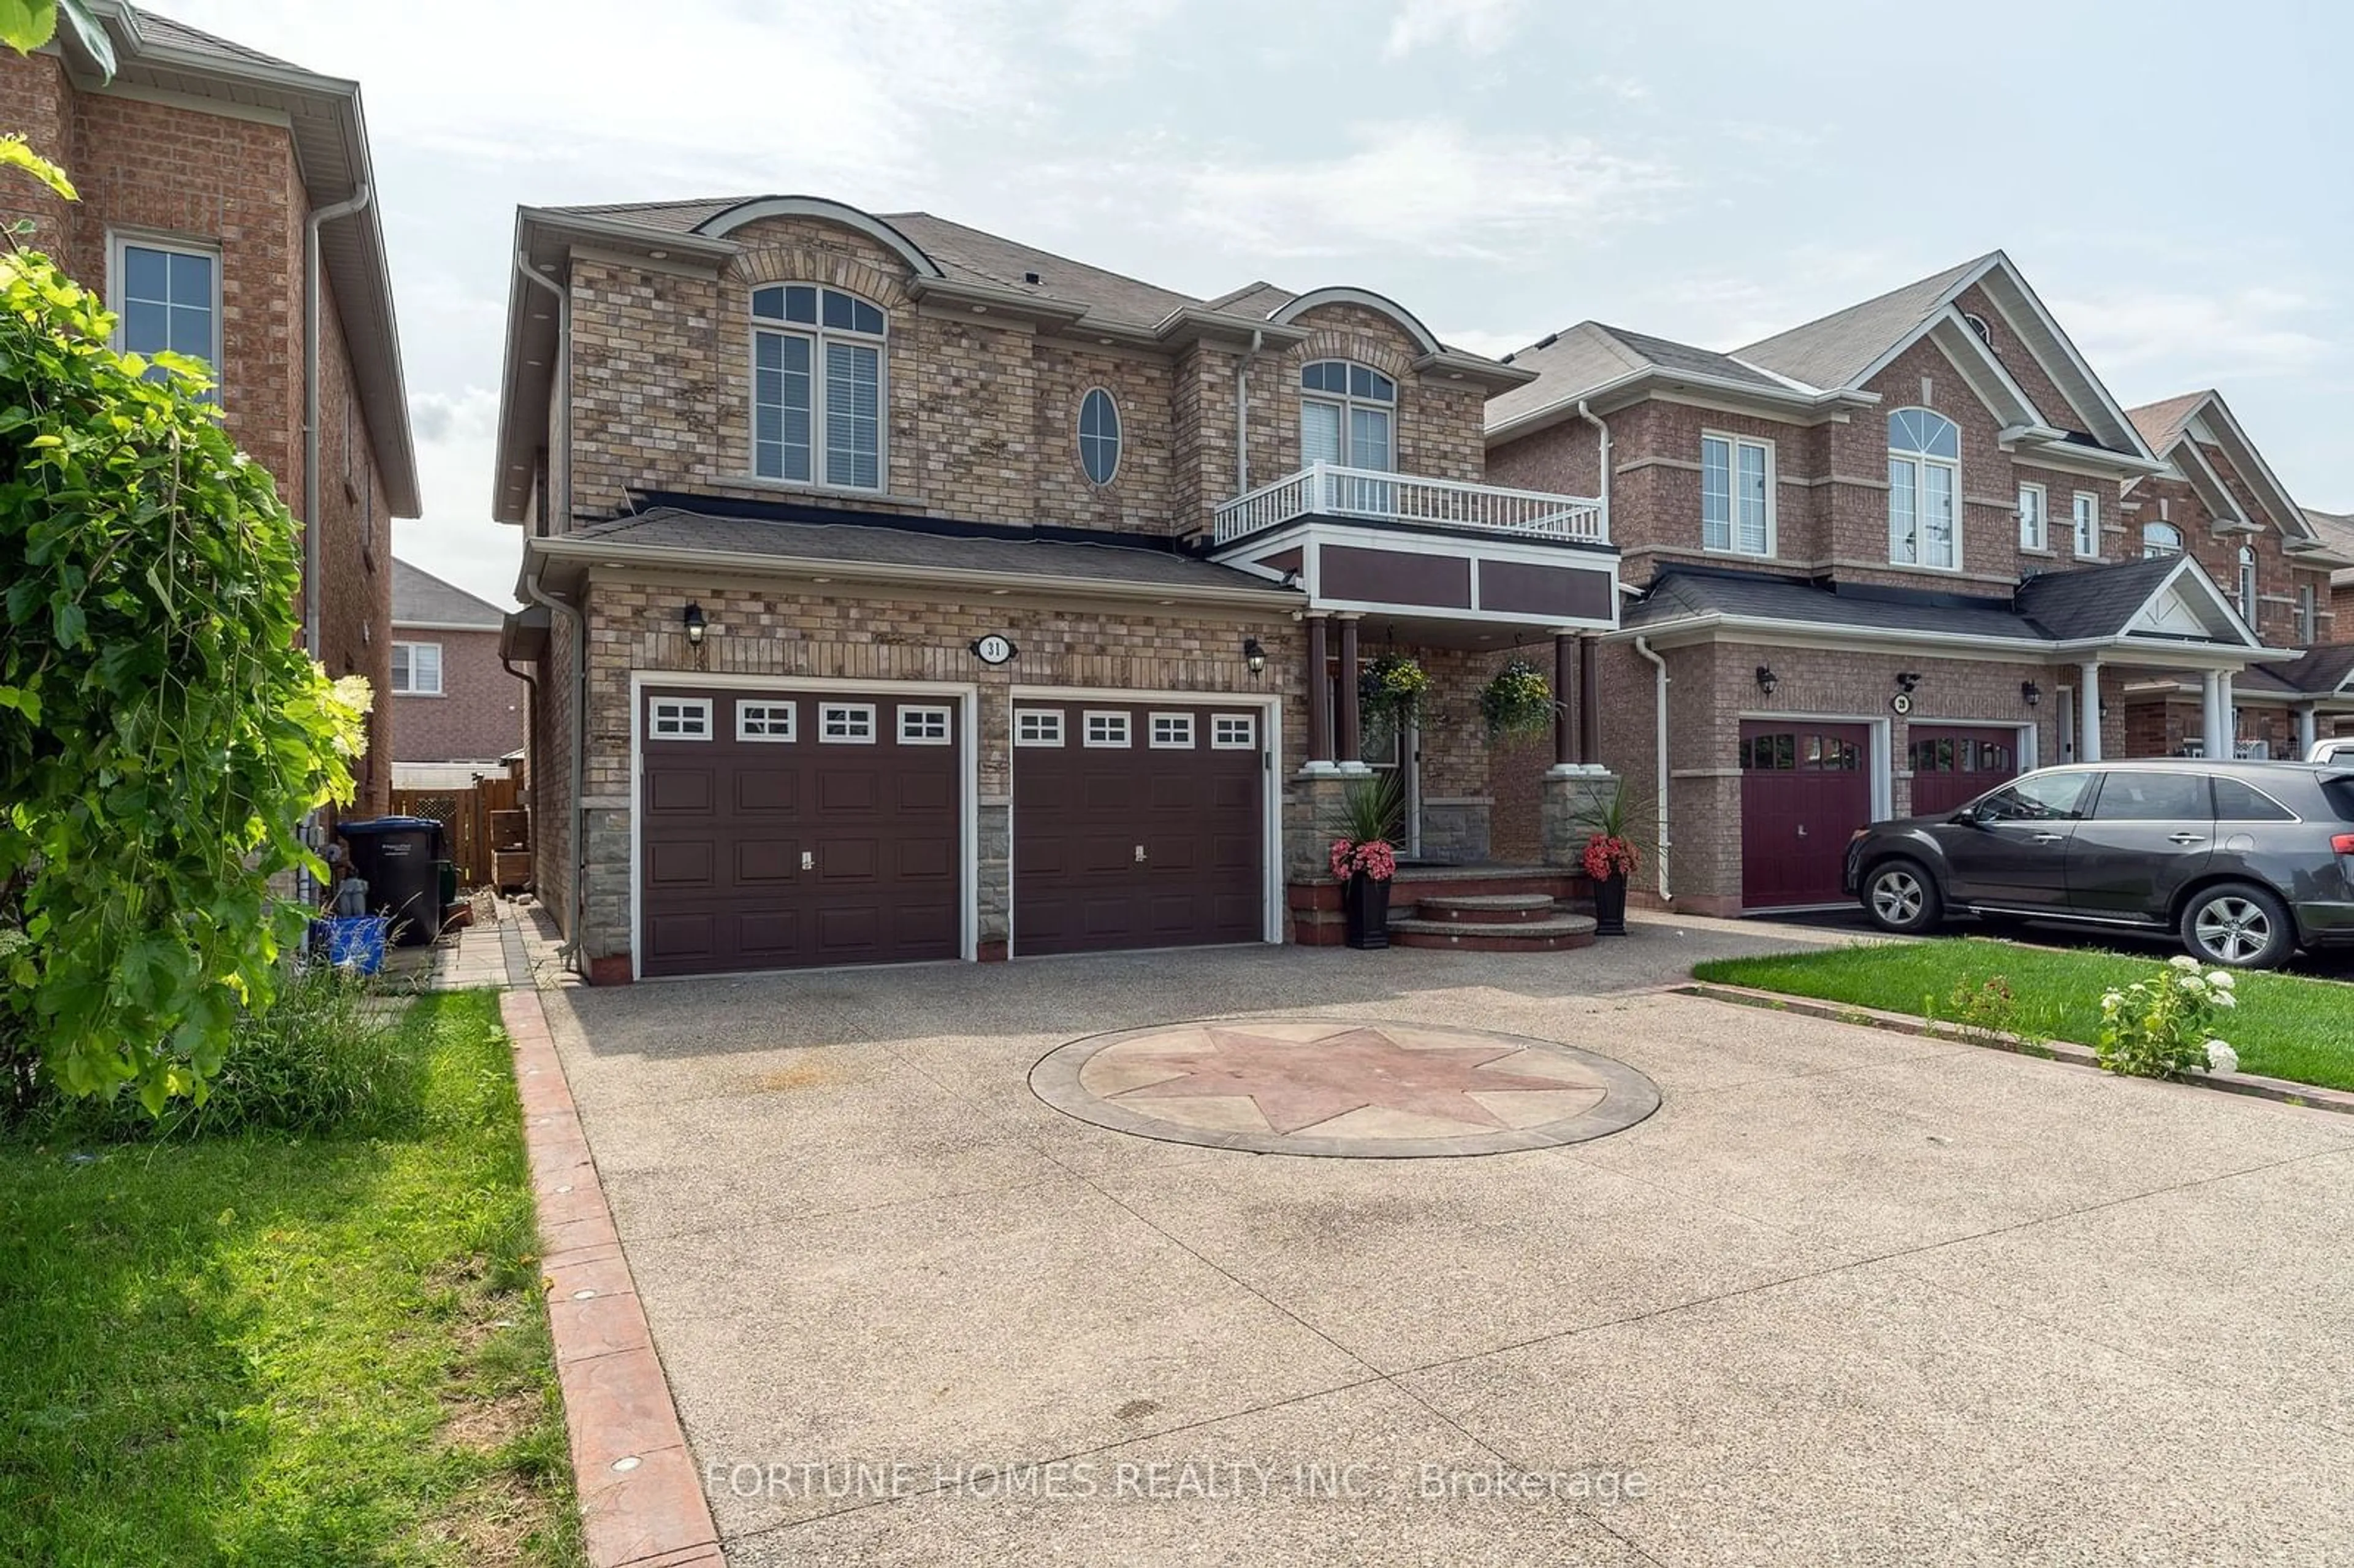 Home with brick exterior material for 31 Mountland Rd, Brampton Ontario L6P 2A7